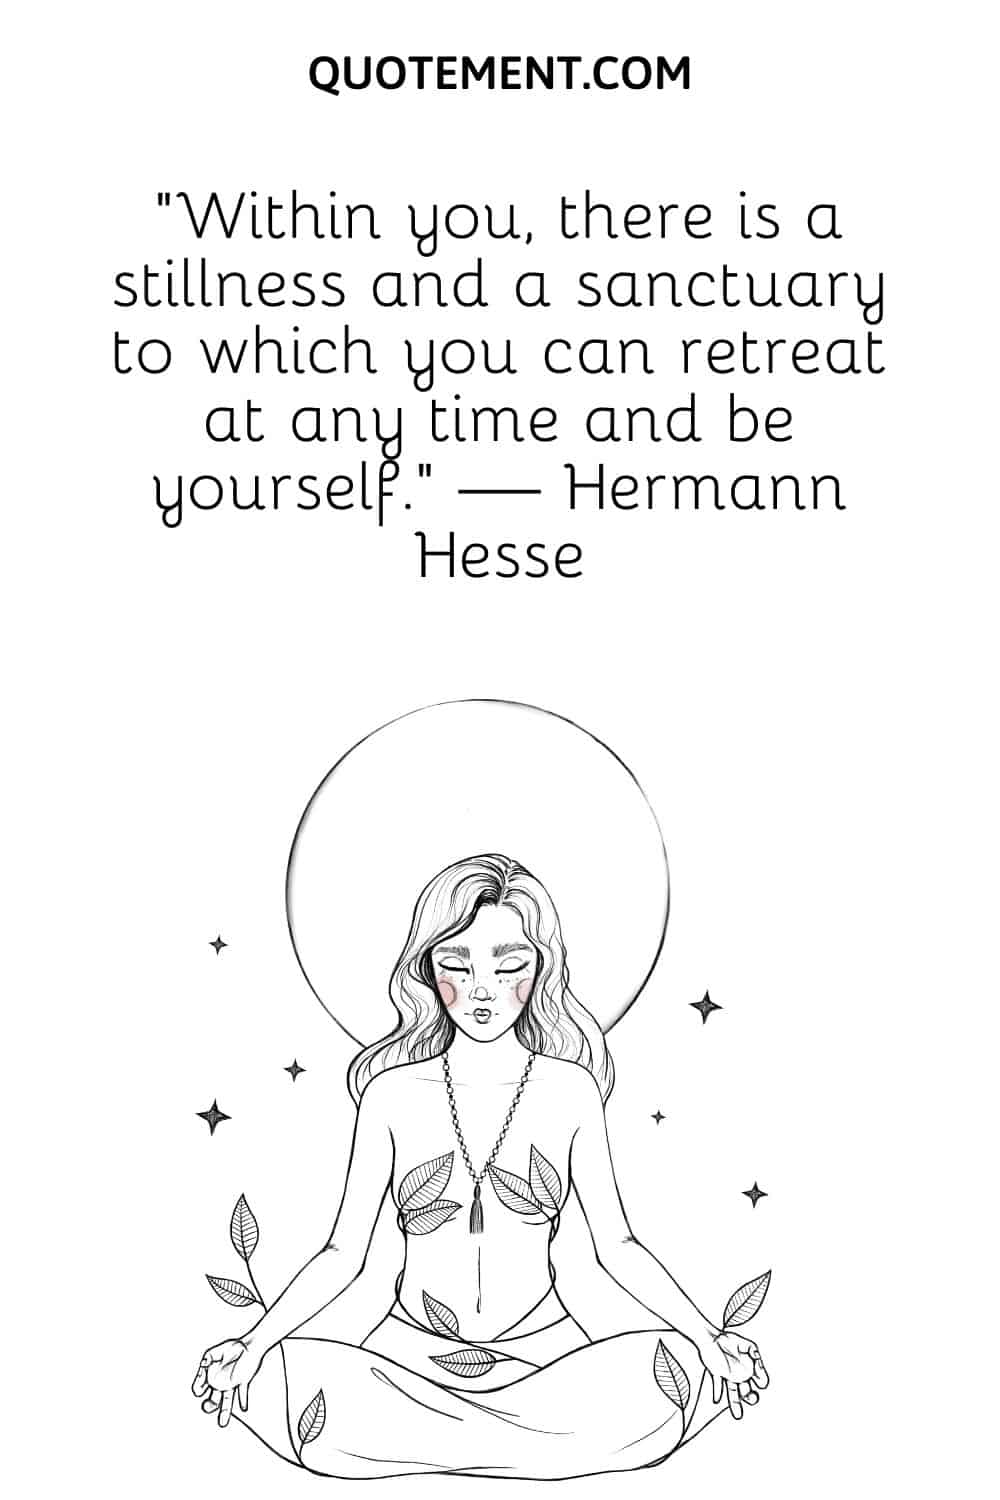 Within you, there is a stillness and a sanctuary to which you can retreat at any time and be yourself.